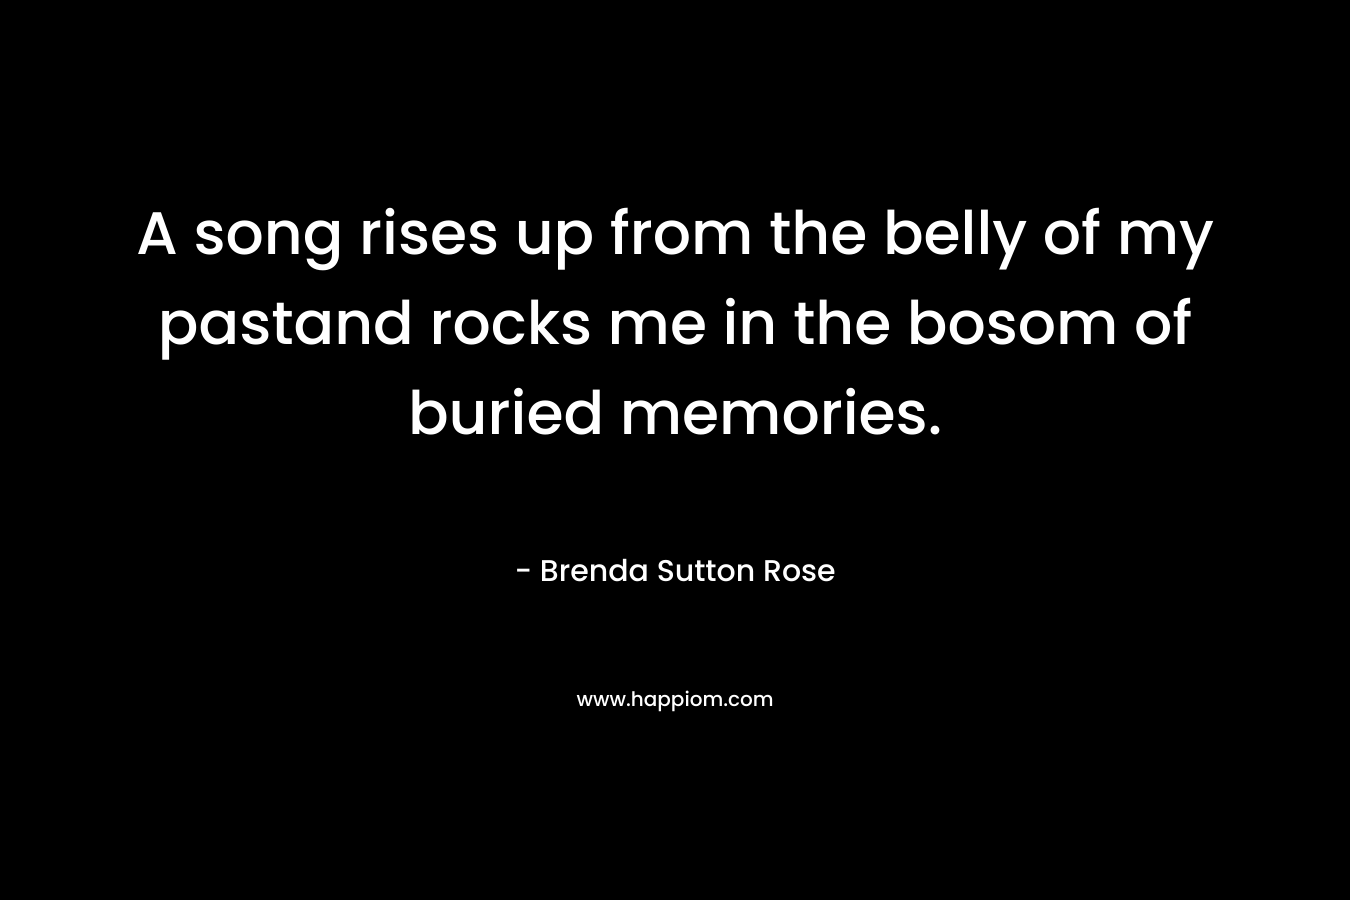 A song rises up from the belly of my pastand rocks me in the bosom of buried memories. – Brenda Sutton Rose